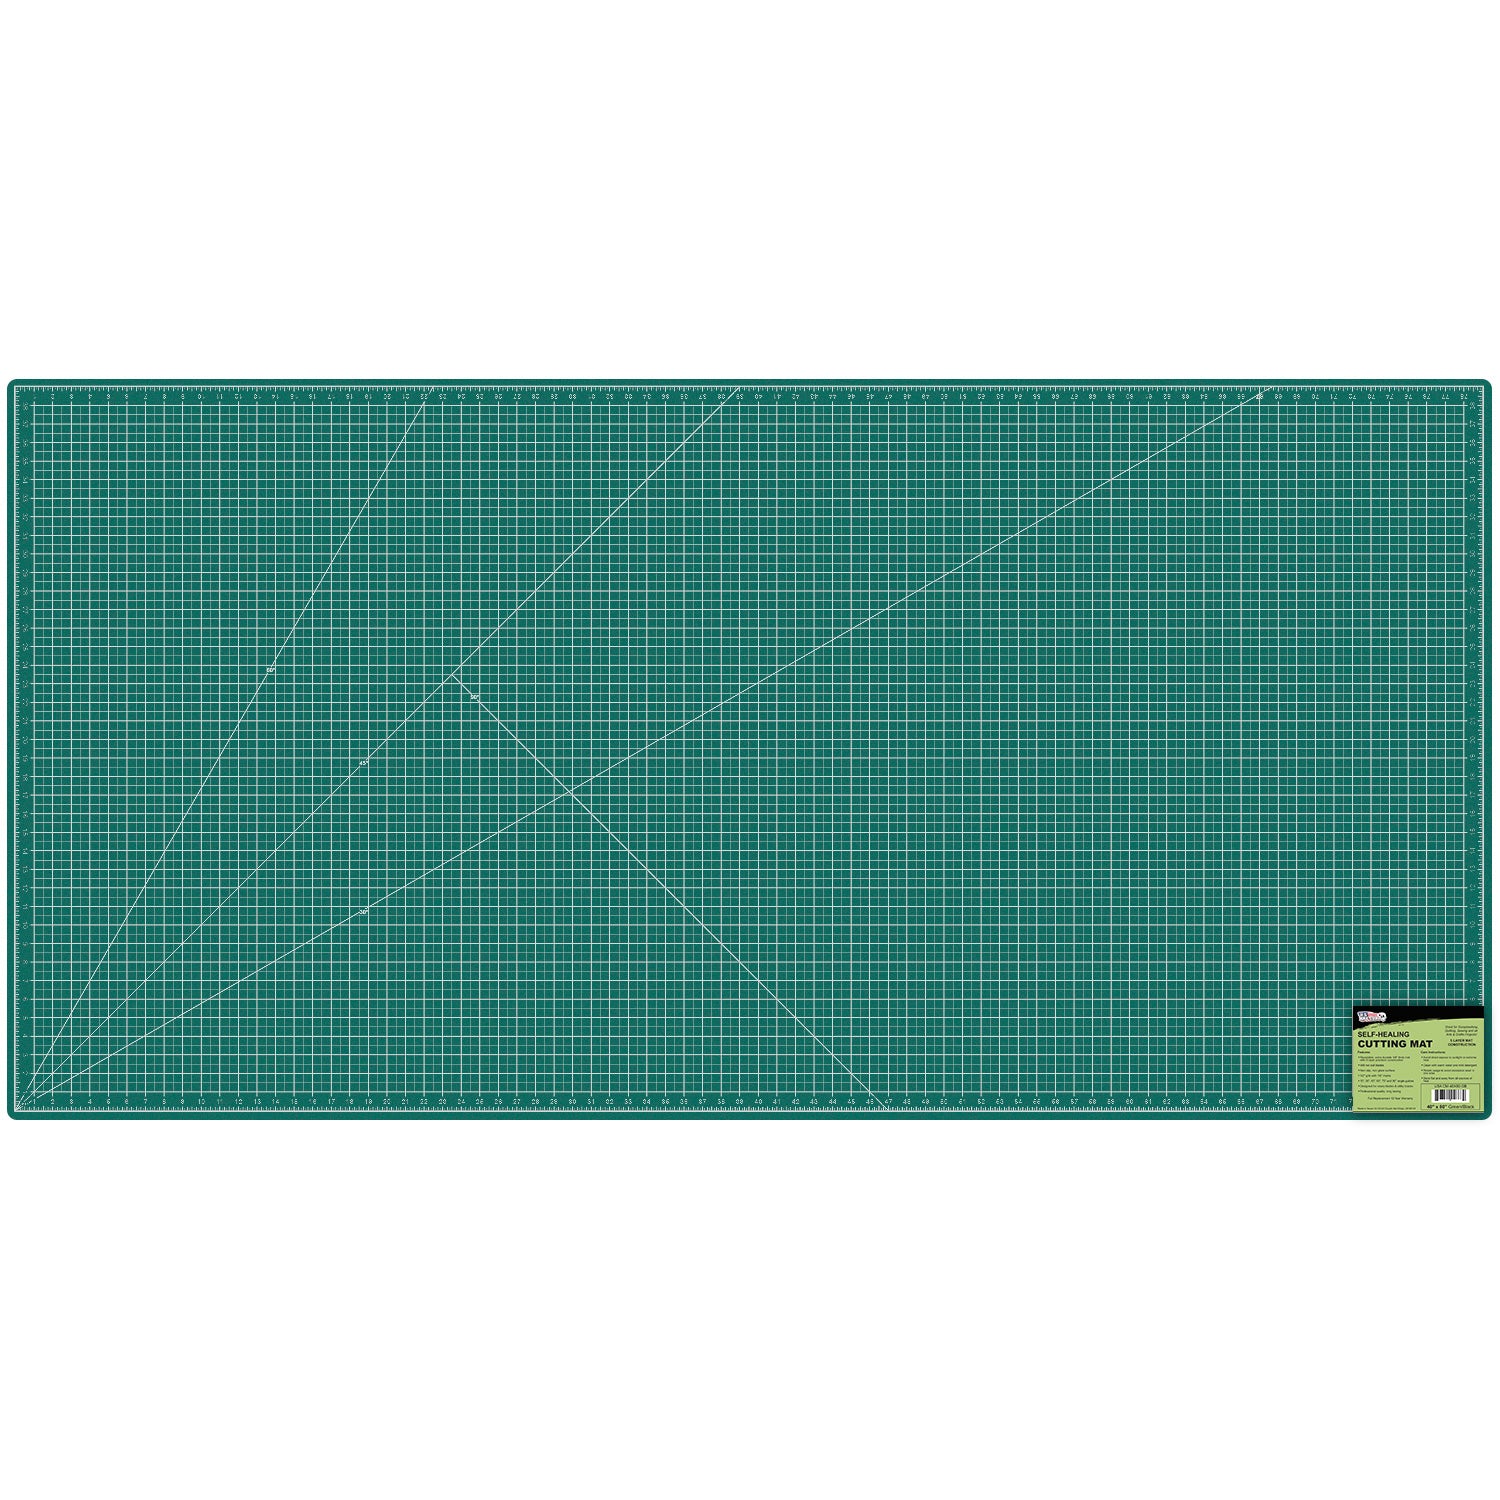 ALVIN 40”x80” SELF-HEALING CUTTING MAT DOUBLE-SIDED, EXTRA LARGE - GBM4080